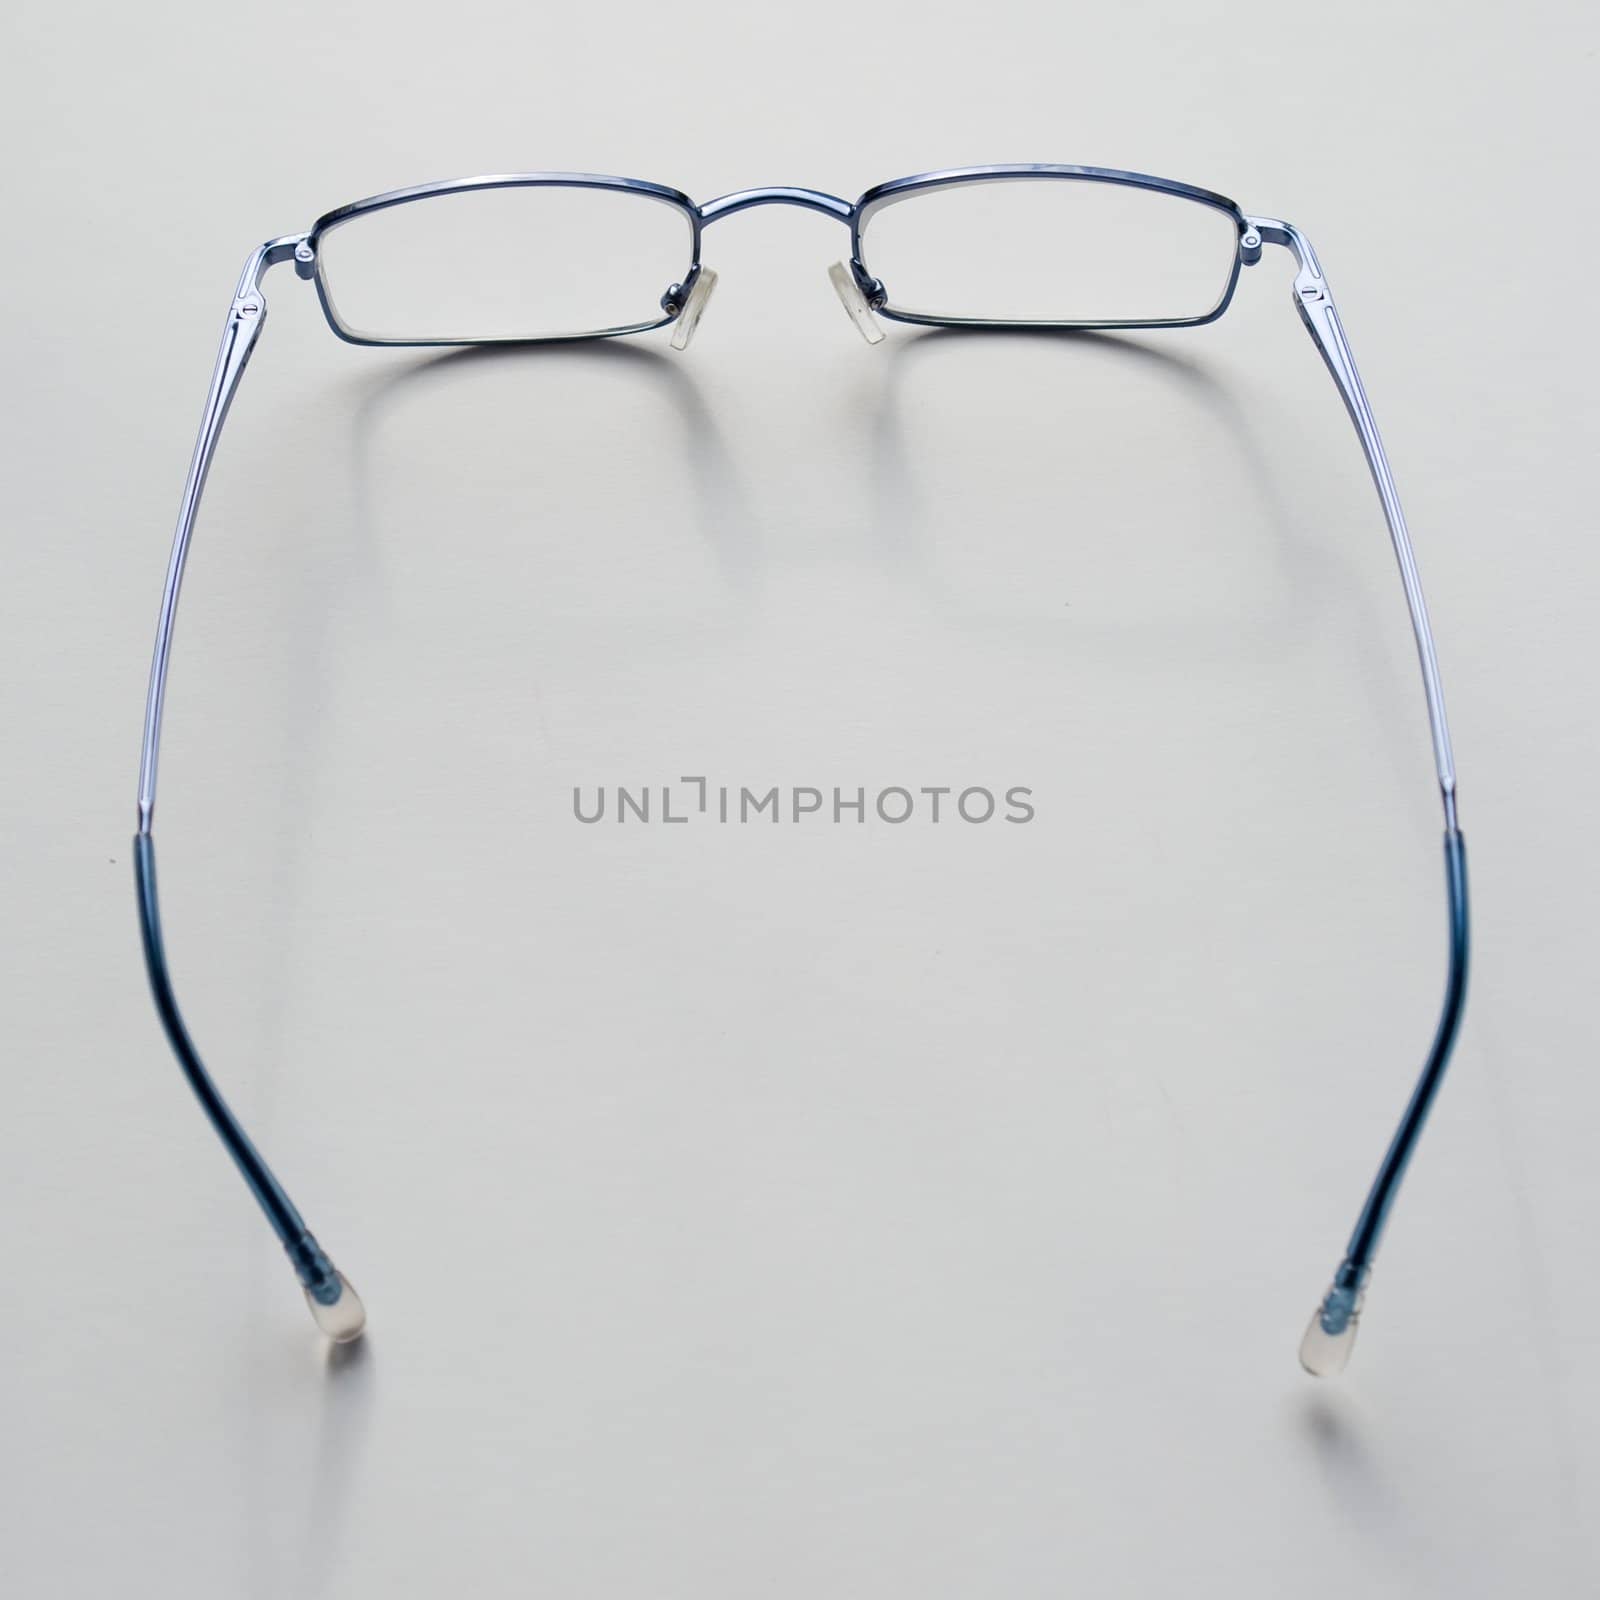 Stylish glasses in a blue frame on a grey background